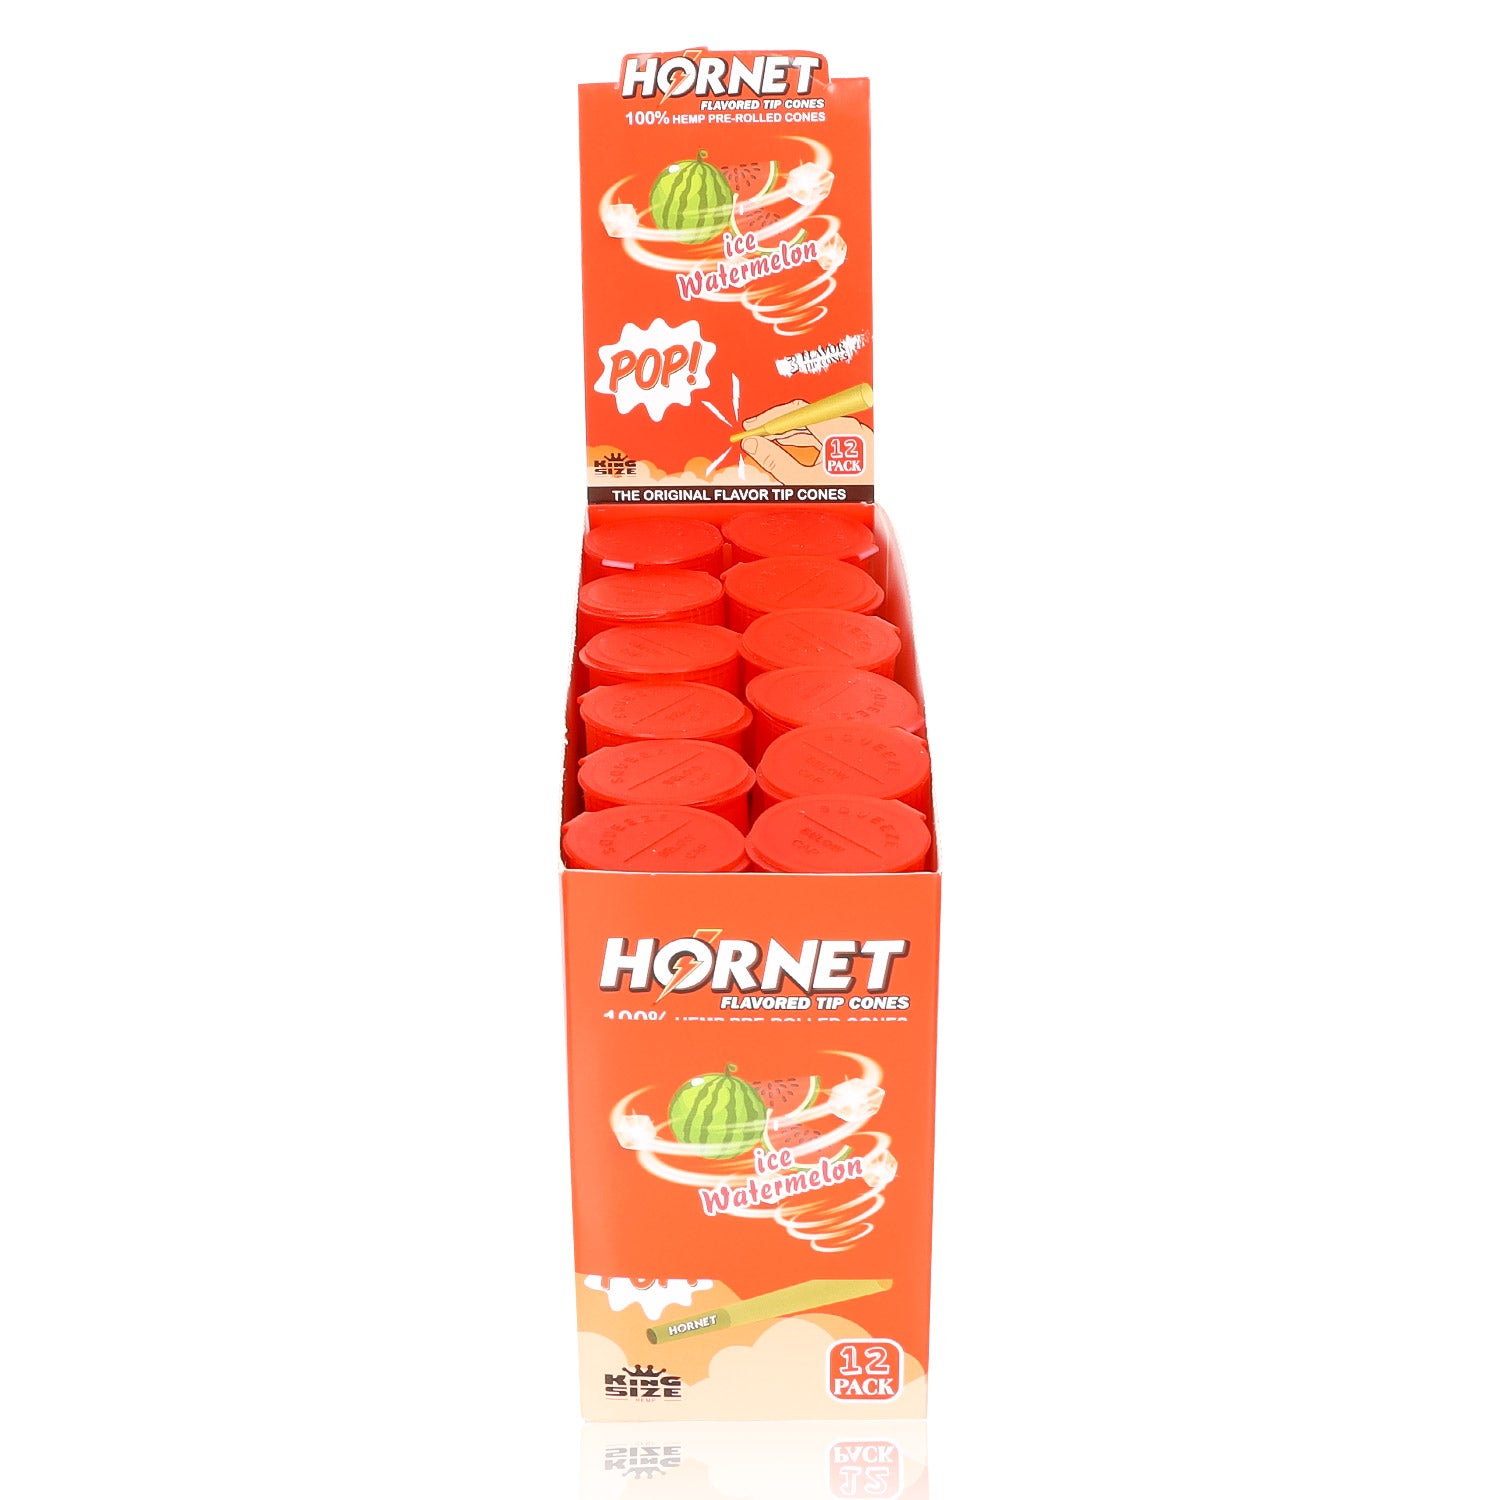 HORNET Watermelon Flavors Pre Rolled Cones, King Size Pre Rolled Rolling Paper With Tips, Slow Burning Rolling Cones & Flavored Pop, 3 PCS / Tube, 12 Tubes / Box